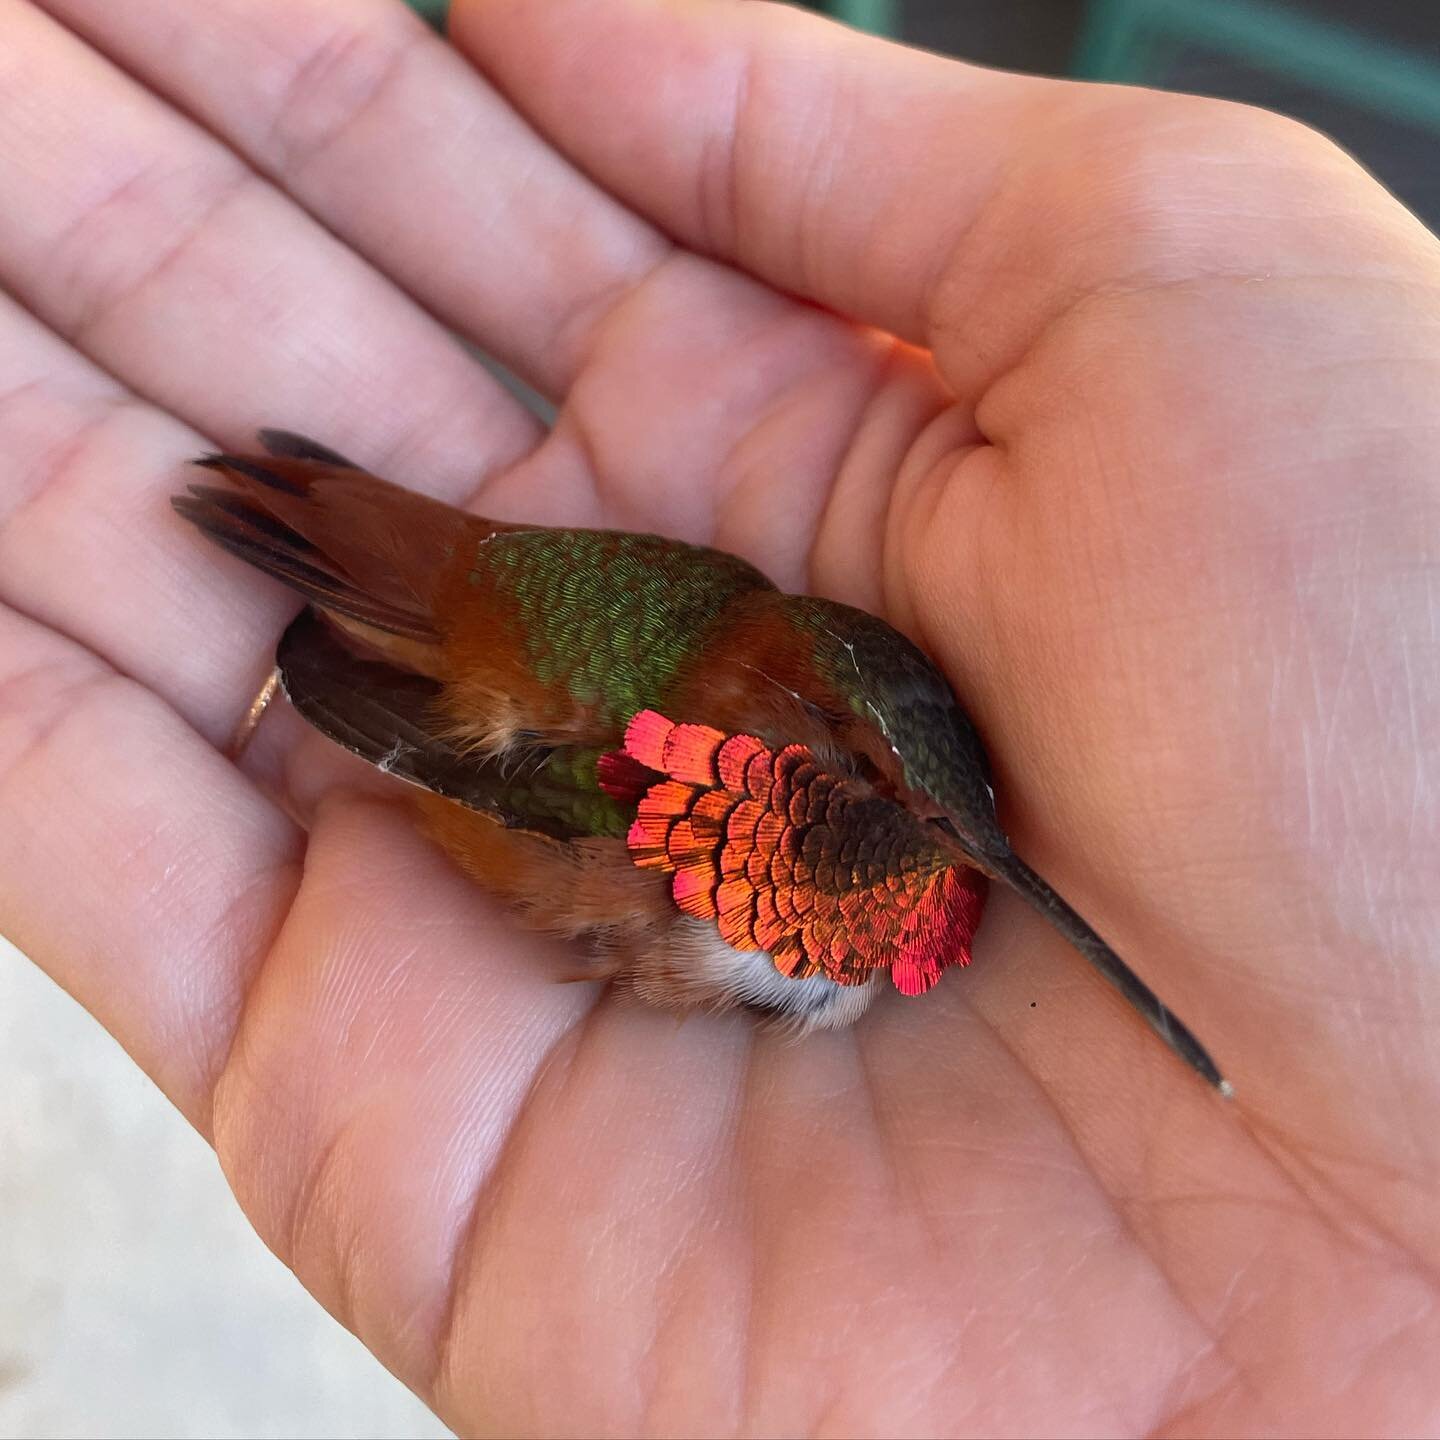 I hope to never have occasion to hold a still hummingbird in my hand again (this one met a heartbreaking fate after getting trapped in a garage) but it was a sad sort of privilege to get so close to such beauty&mdash;those iridescent throat sequins a